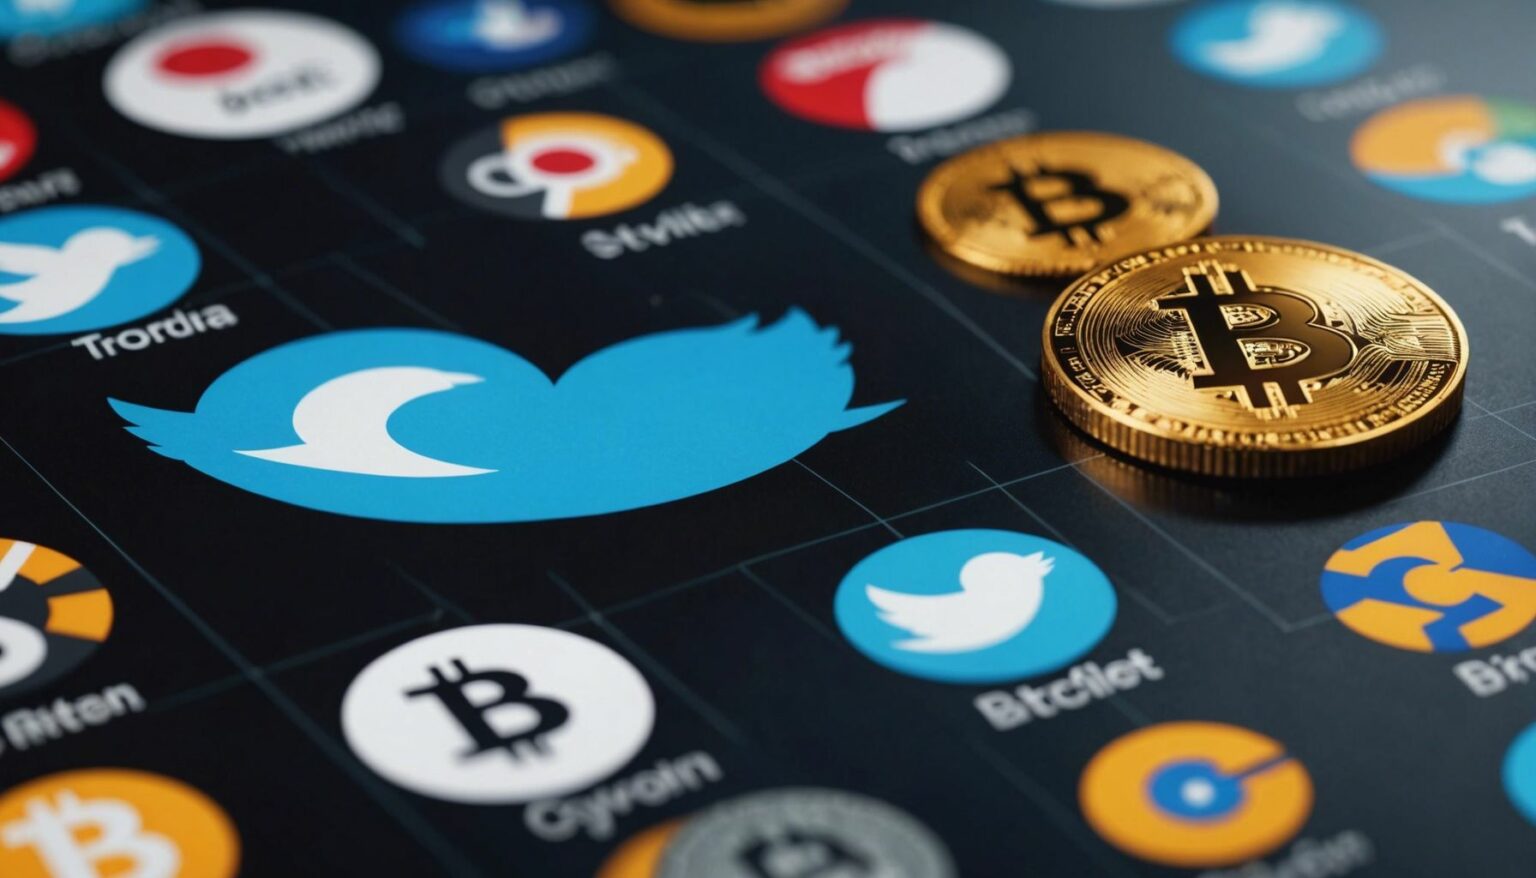 Twitter logo with Bitcoin and Ethereum symbols, highlighting social media's impact on digital currency.